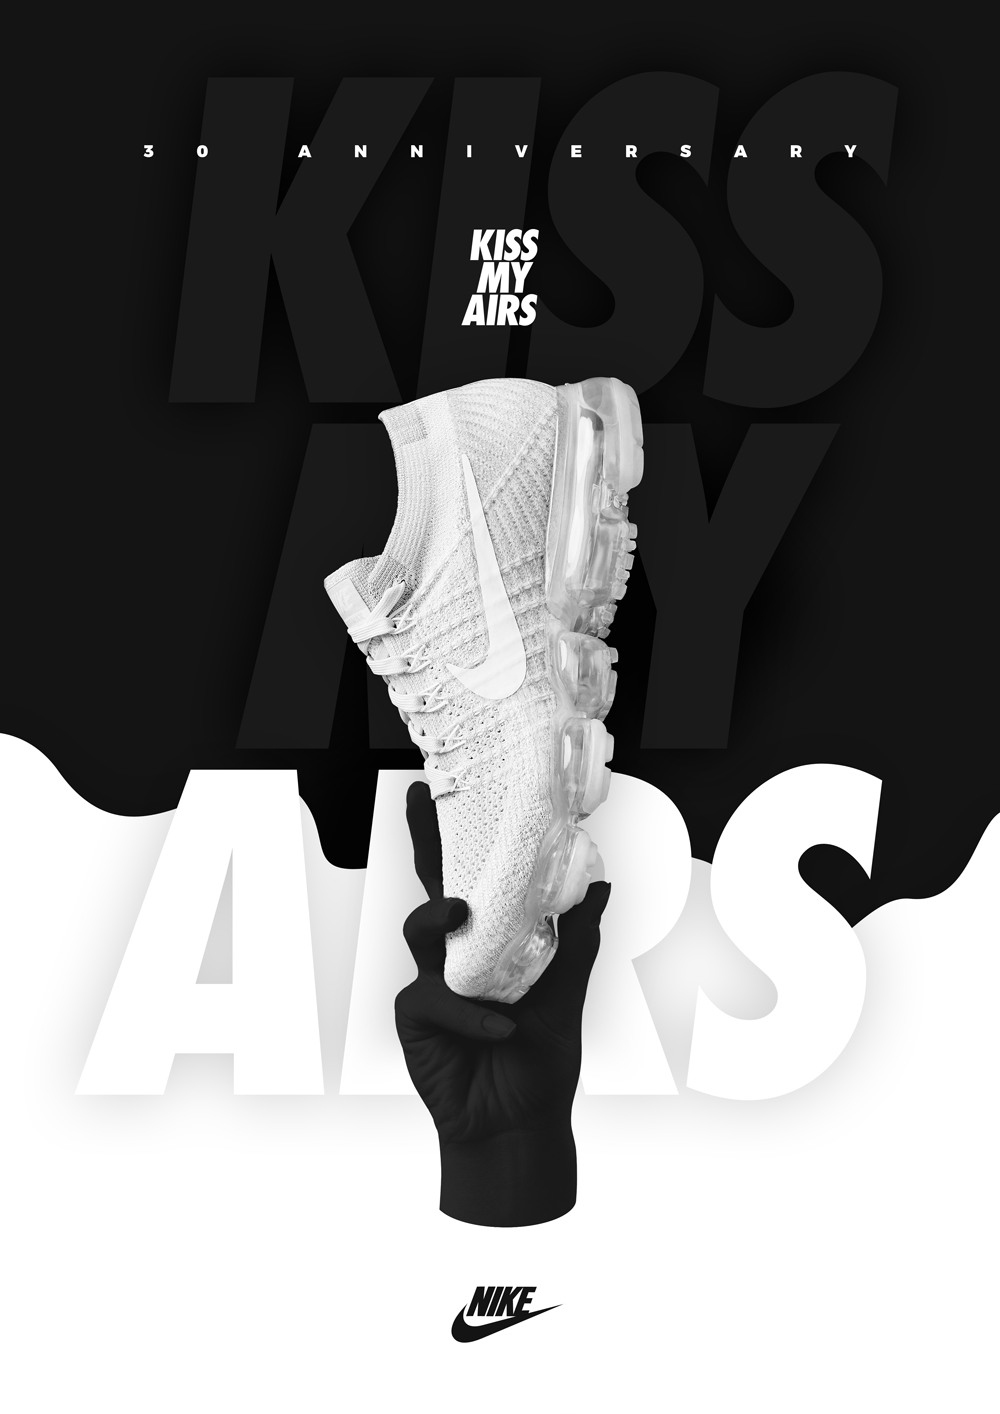 Nike airs contest Kiss My Airs